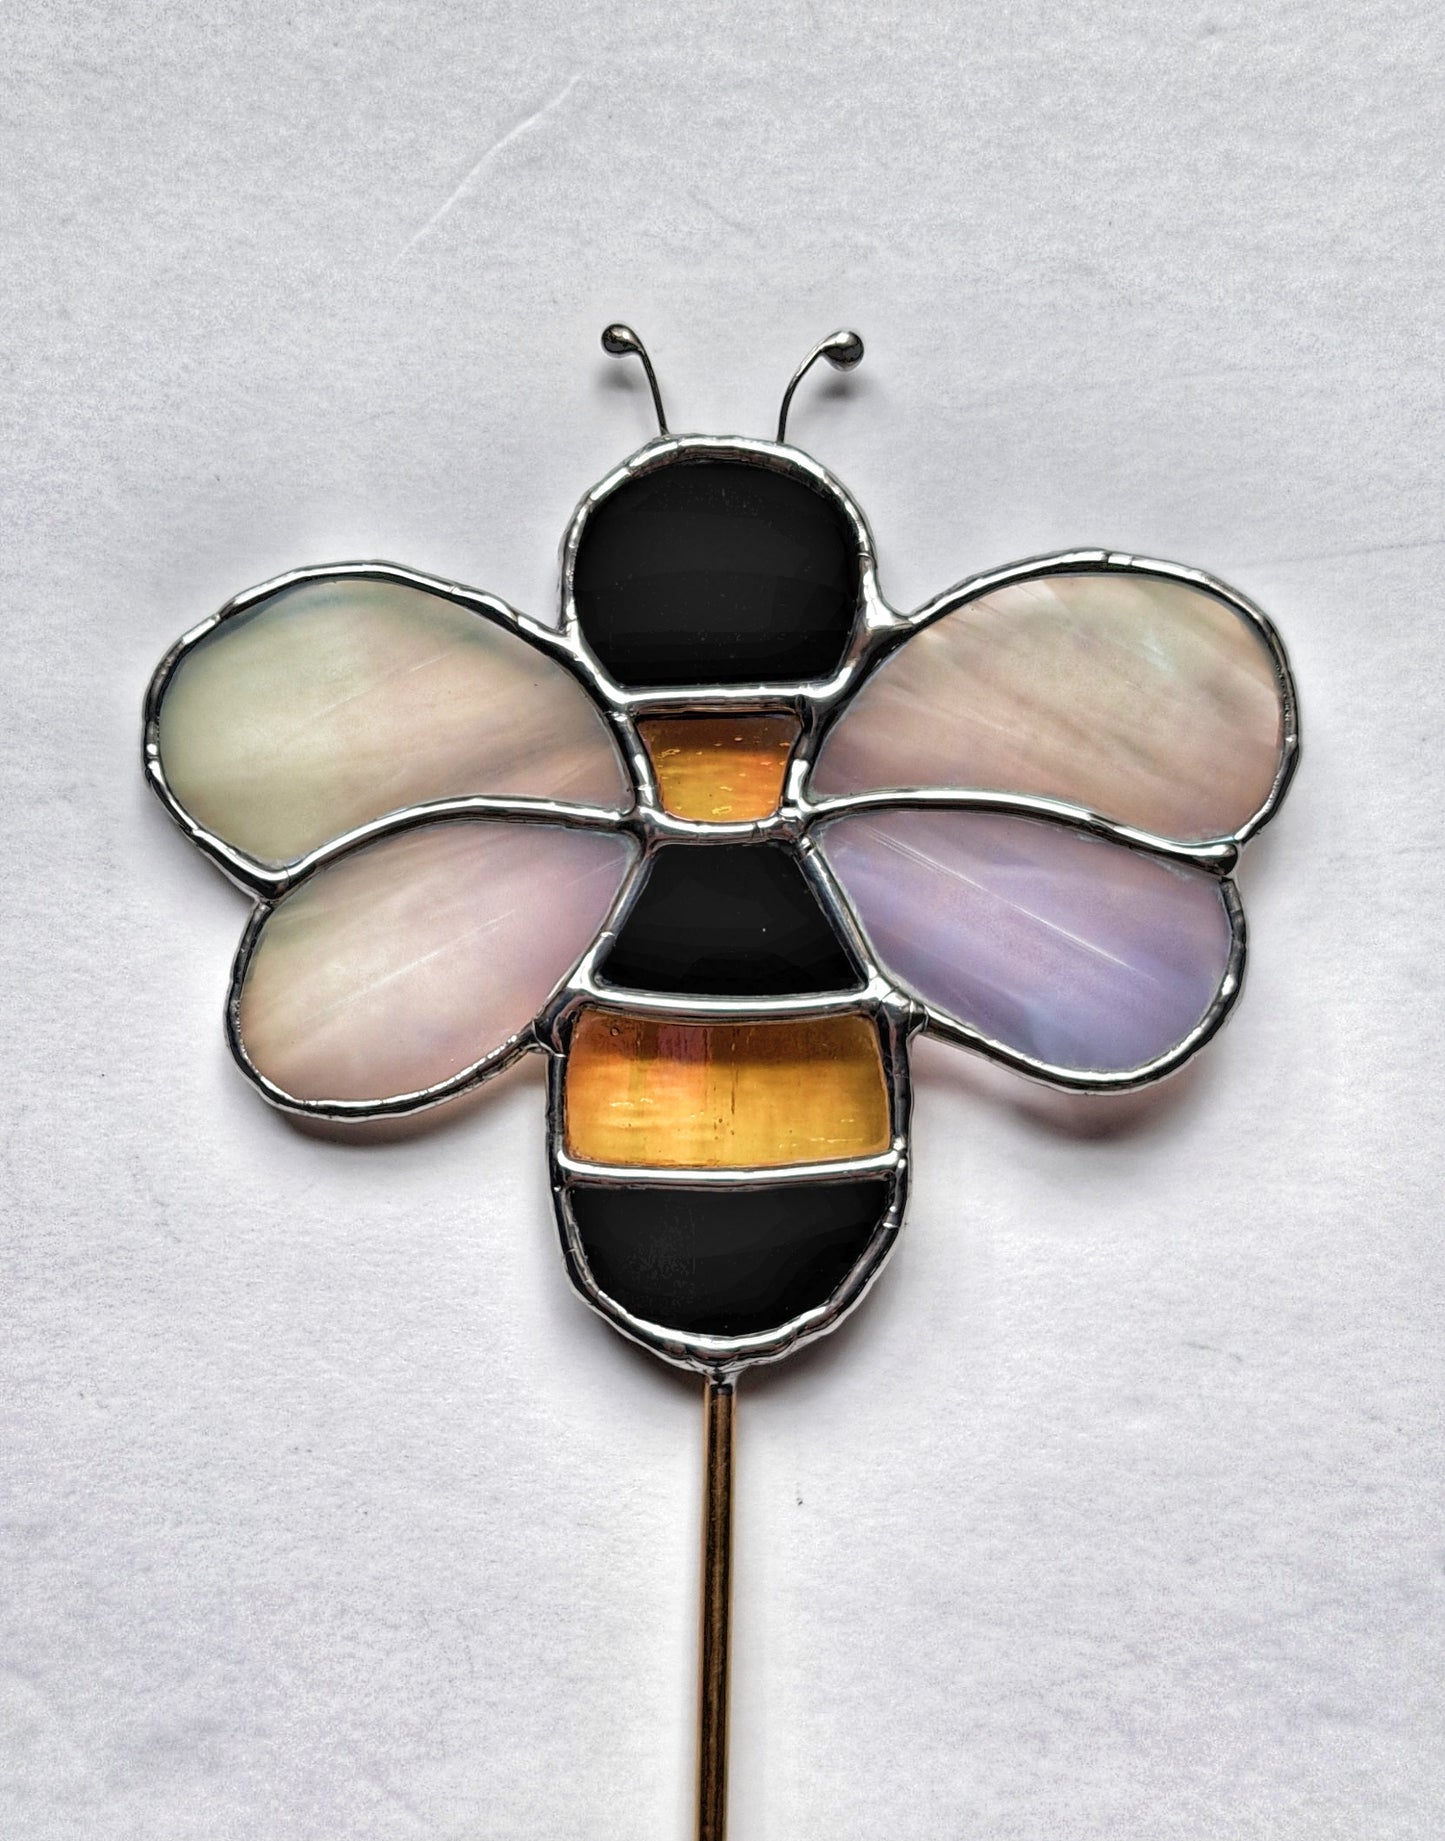 This Planter is handcrafted with shiny black glass, iridescent yellow and iridescent clear glass for the wings.on a solid brass rod.